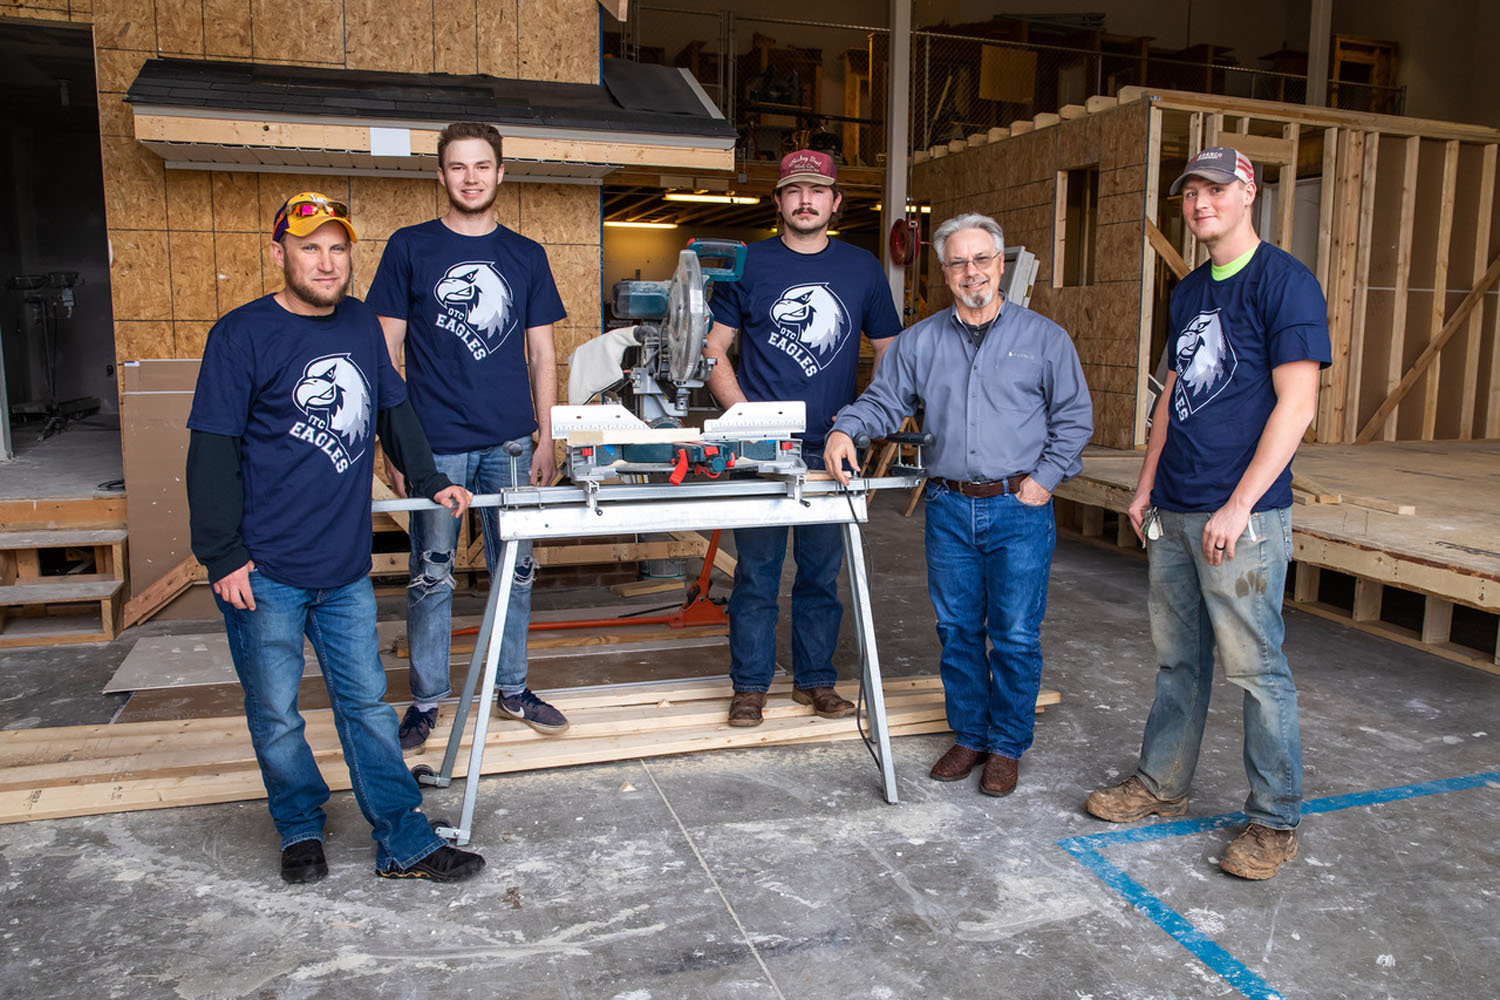 CARPENTRY CLASS
Ozarks Technical Community College and contractor Branco Enterprises Inc. are partnering on a carpentry apprenticeship program. The school’s Center for Workforce Development provides on-the-job experience and classroom instruction to select employees. Officials say six students are enrolled, and pictured at right are Daniel Walker, Chance York, Chase Holmes, instructor Allen Hall and Jared Rogers. Hall, a longtime Branco employee, was hired by OTC to teach the classes. According to a news release, he was among Branco’s inaugural class of apprentices in 1993.